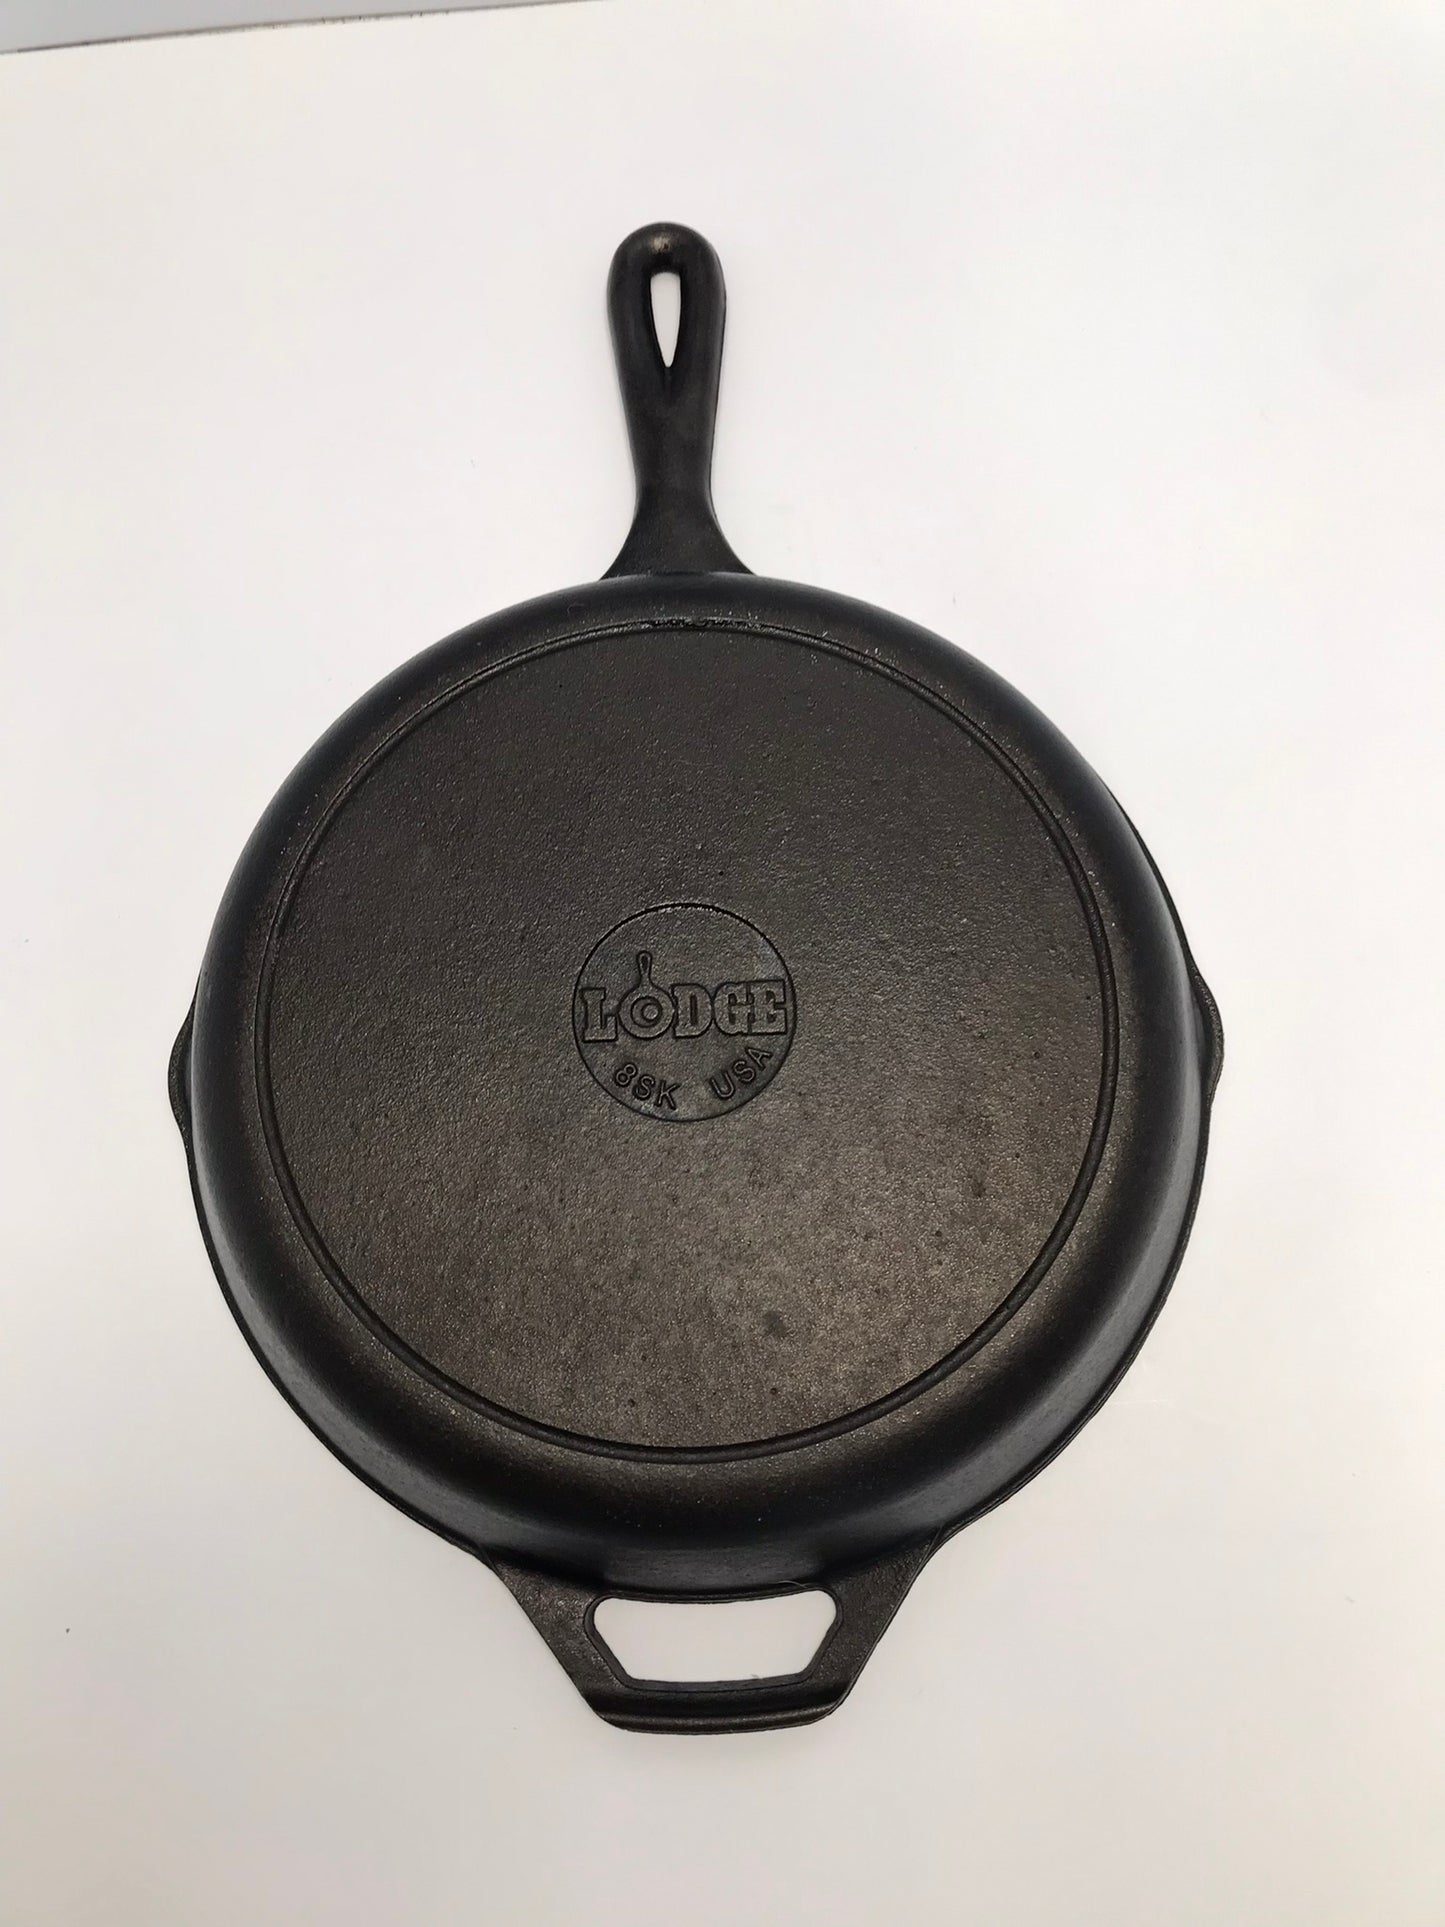 Cottage Cast Iron Lodge Fry Frying Pan Skillet 10.25" Excellent for Home or Camping Like New